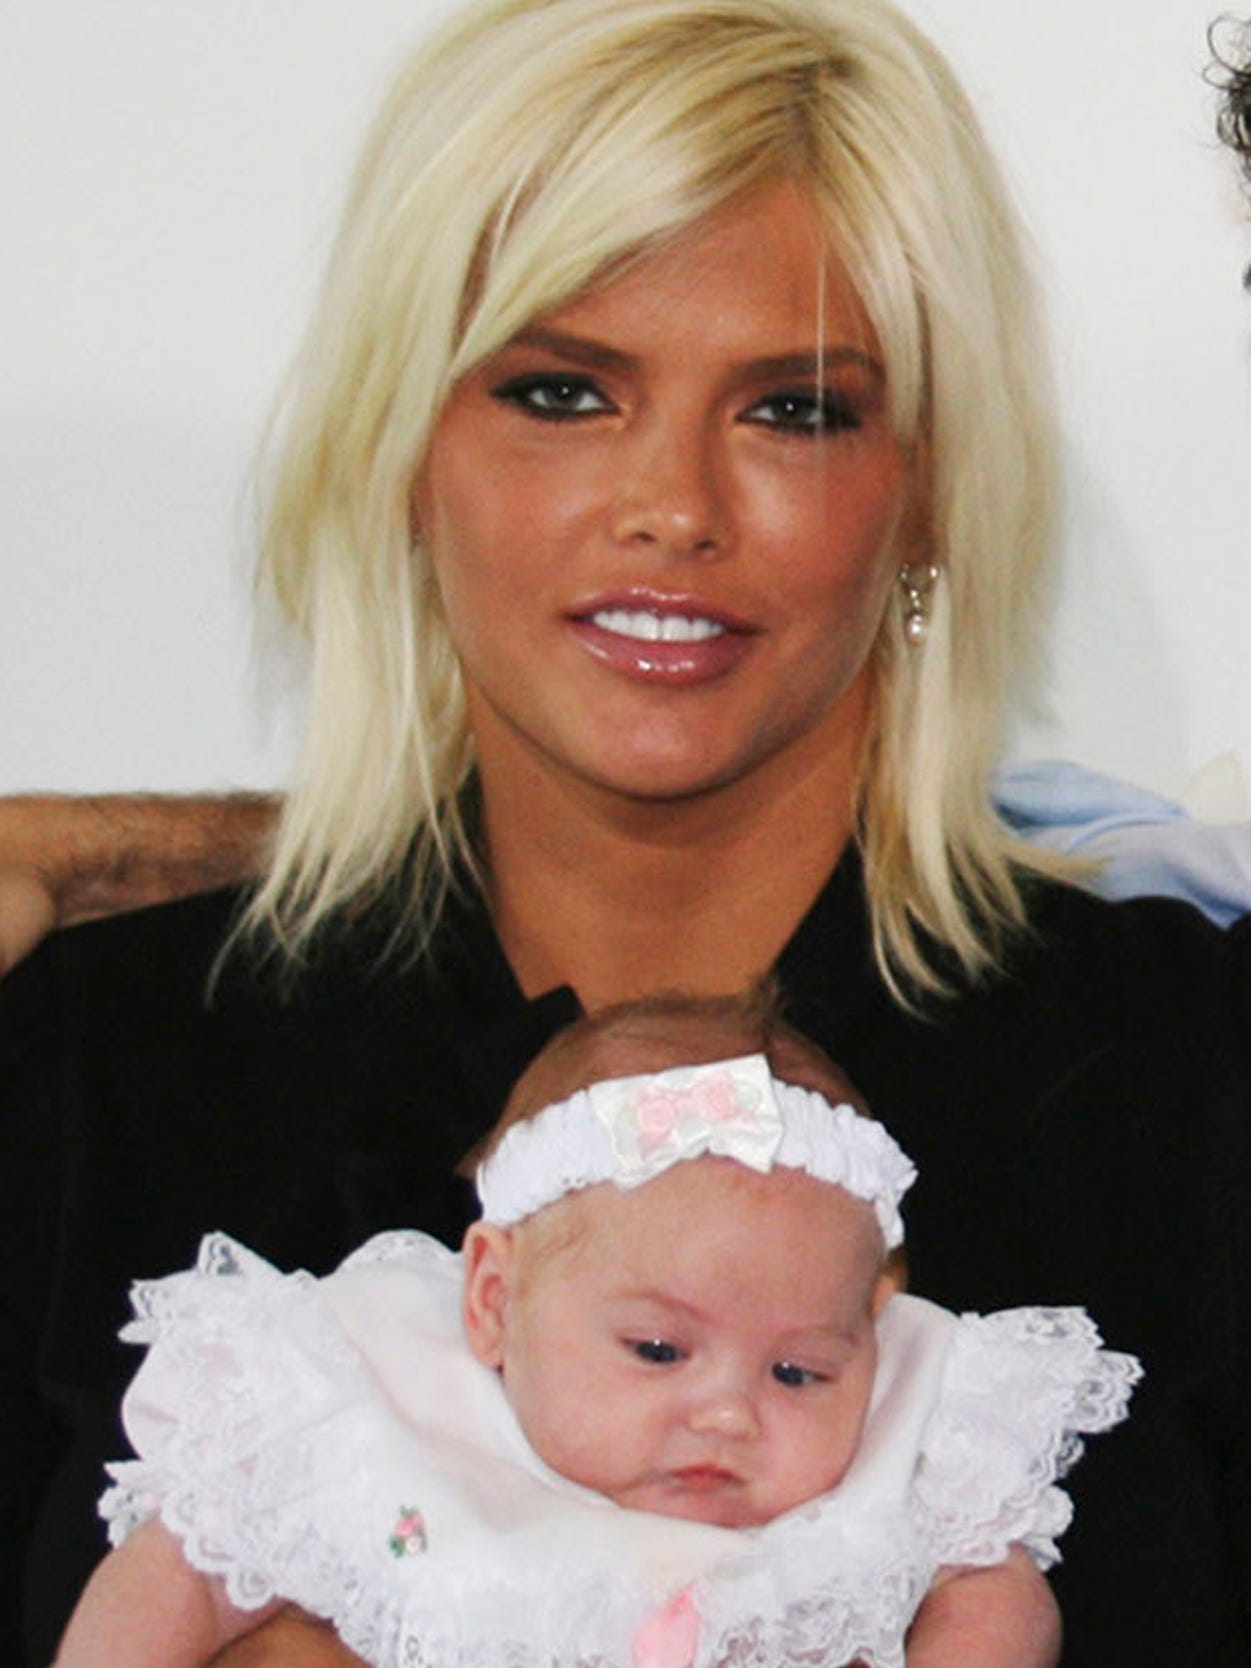 Anna Nicole Smith's daughter, Dannielynn, loses out on mom's millions